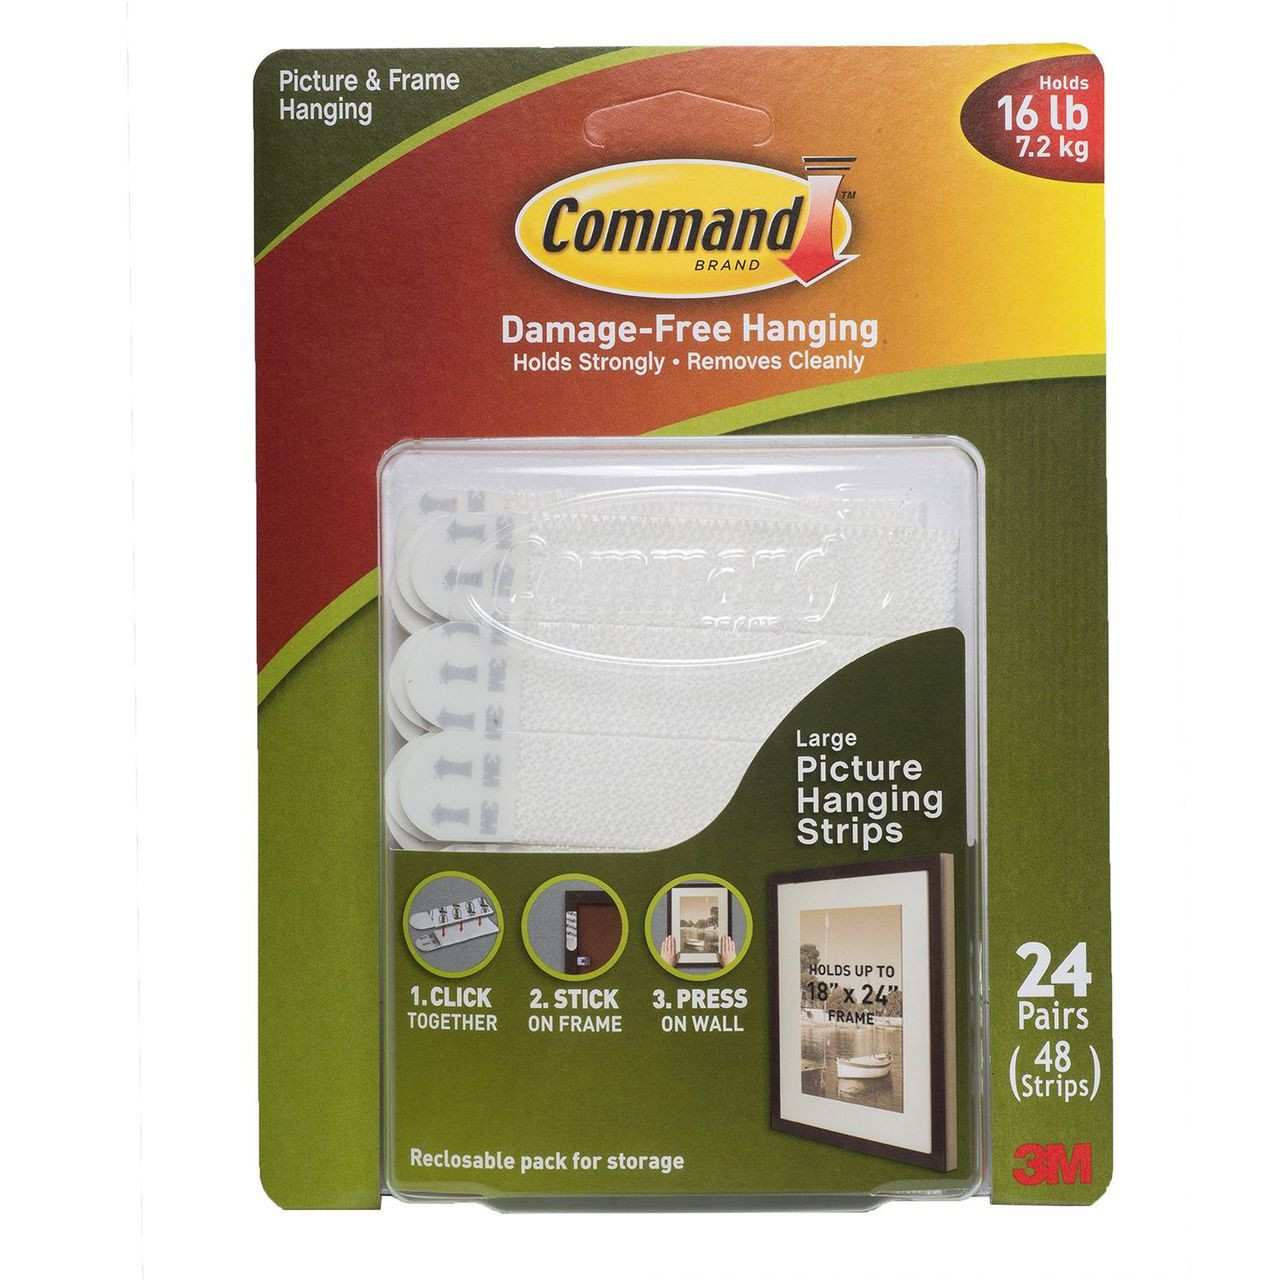 Command Large Picture Hanging Strips - 24 pairs